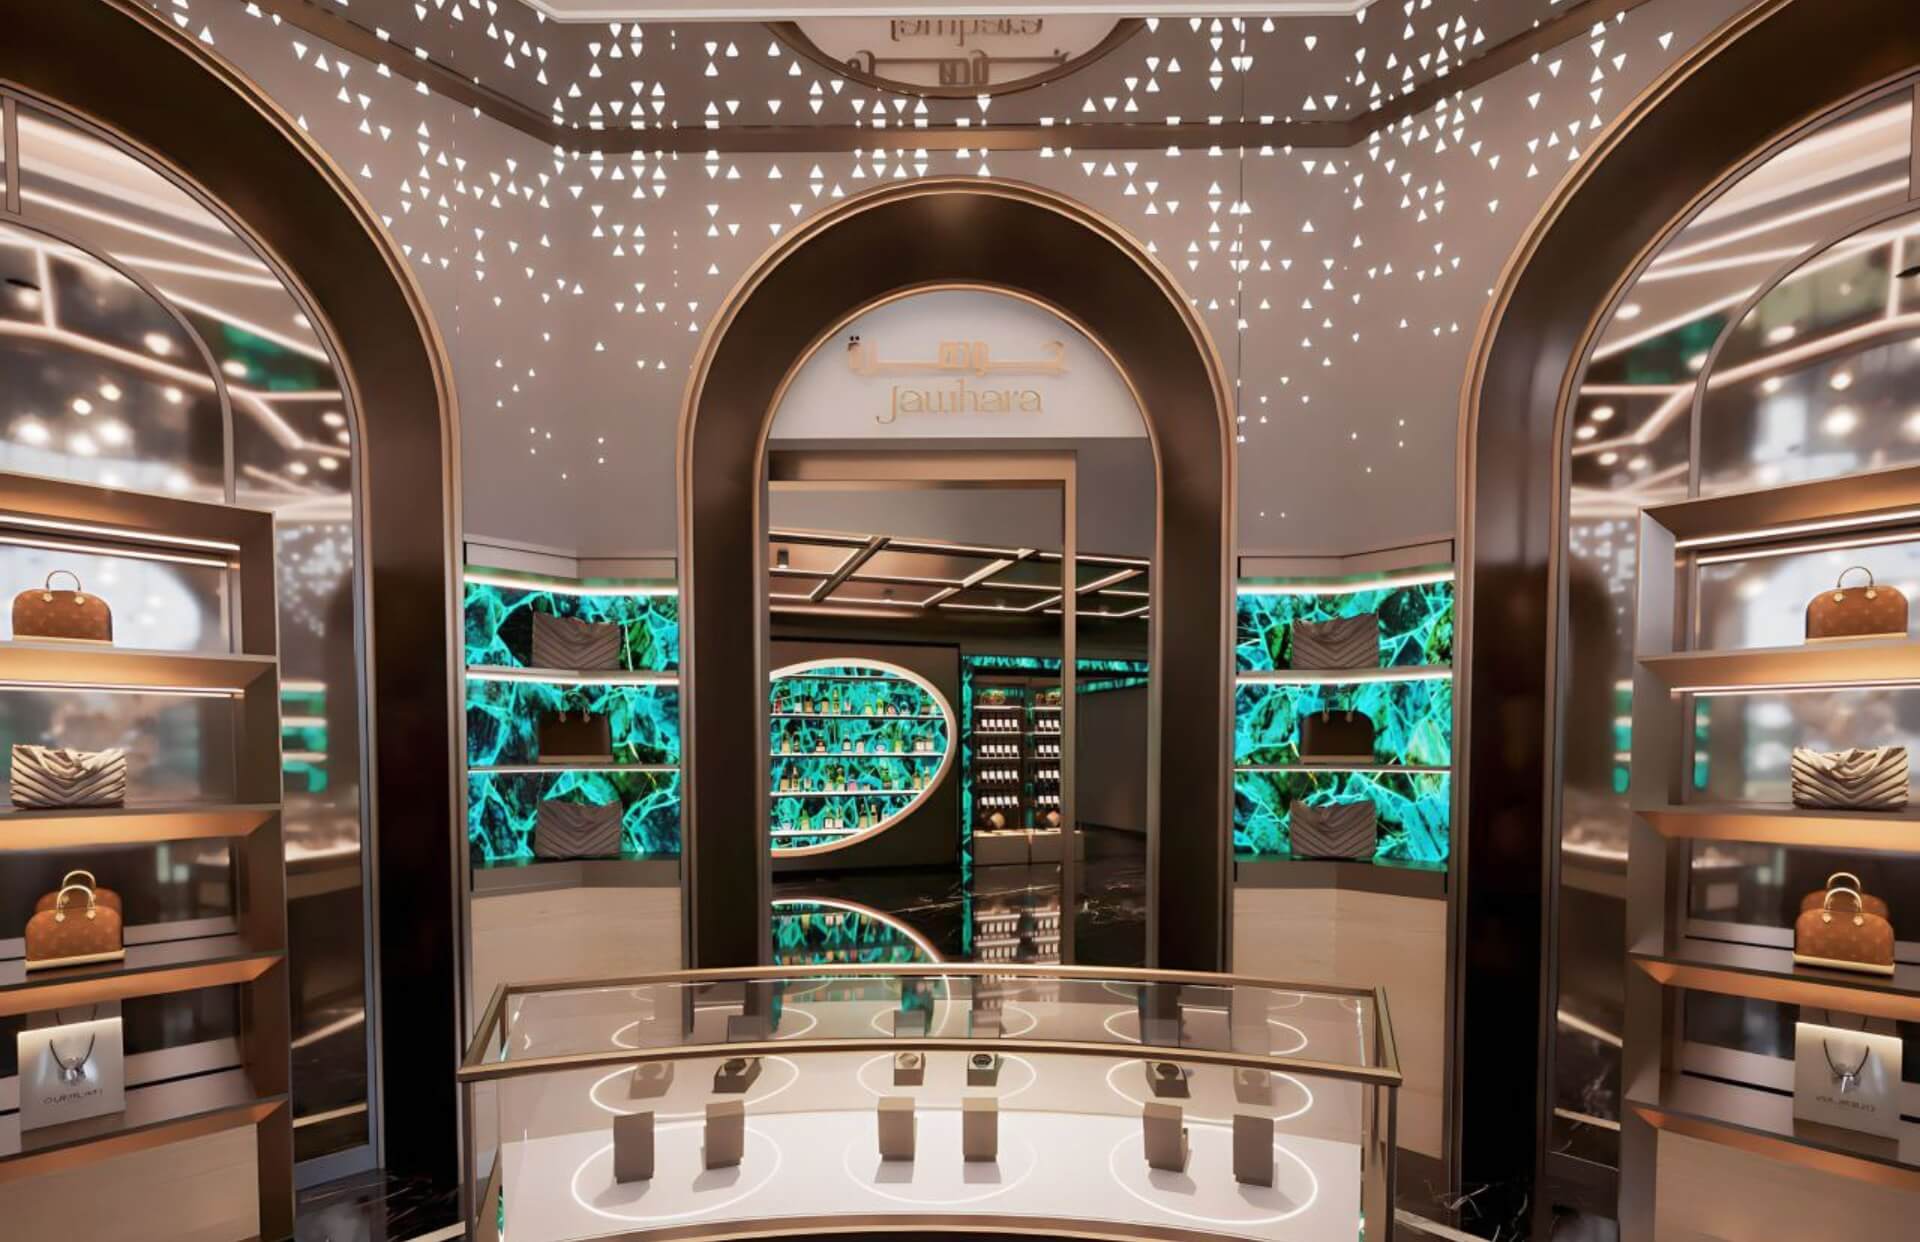 Luxurious jewelry shop interior showcasing custom fit-out and elegant display cases